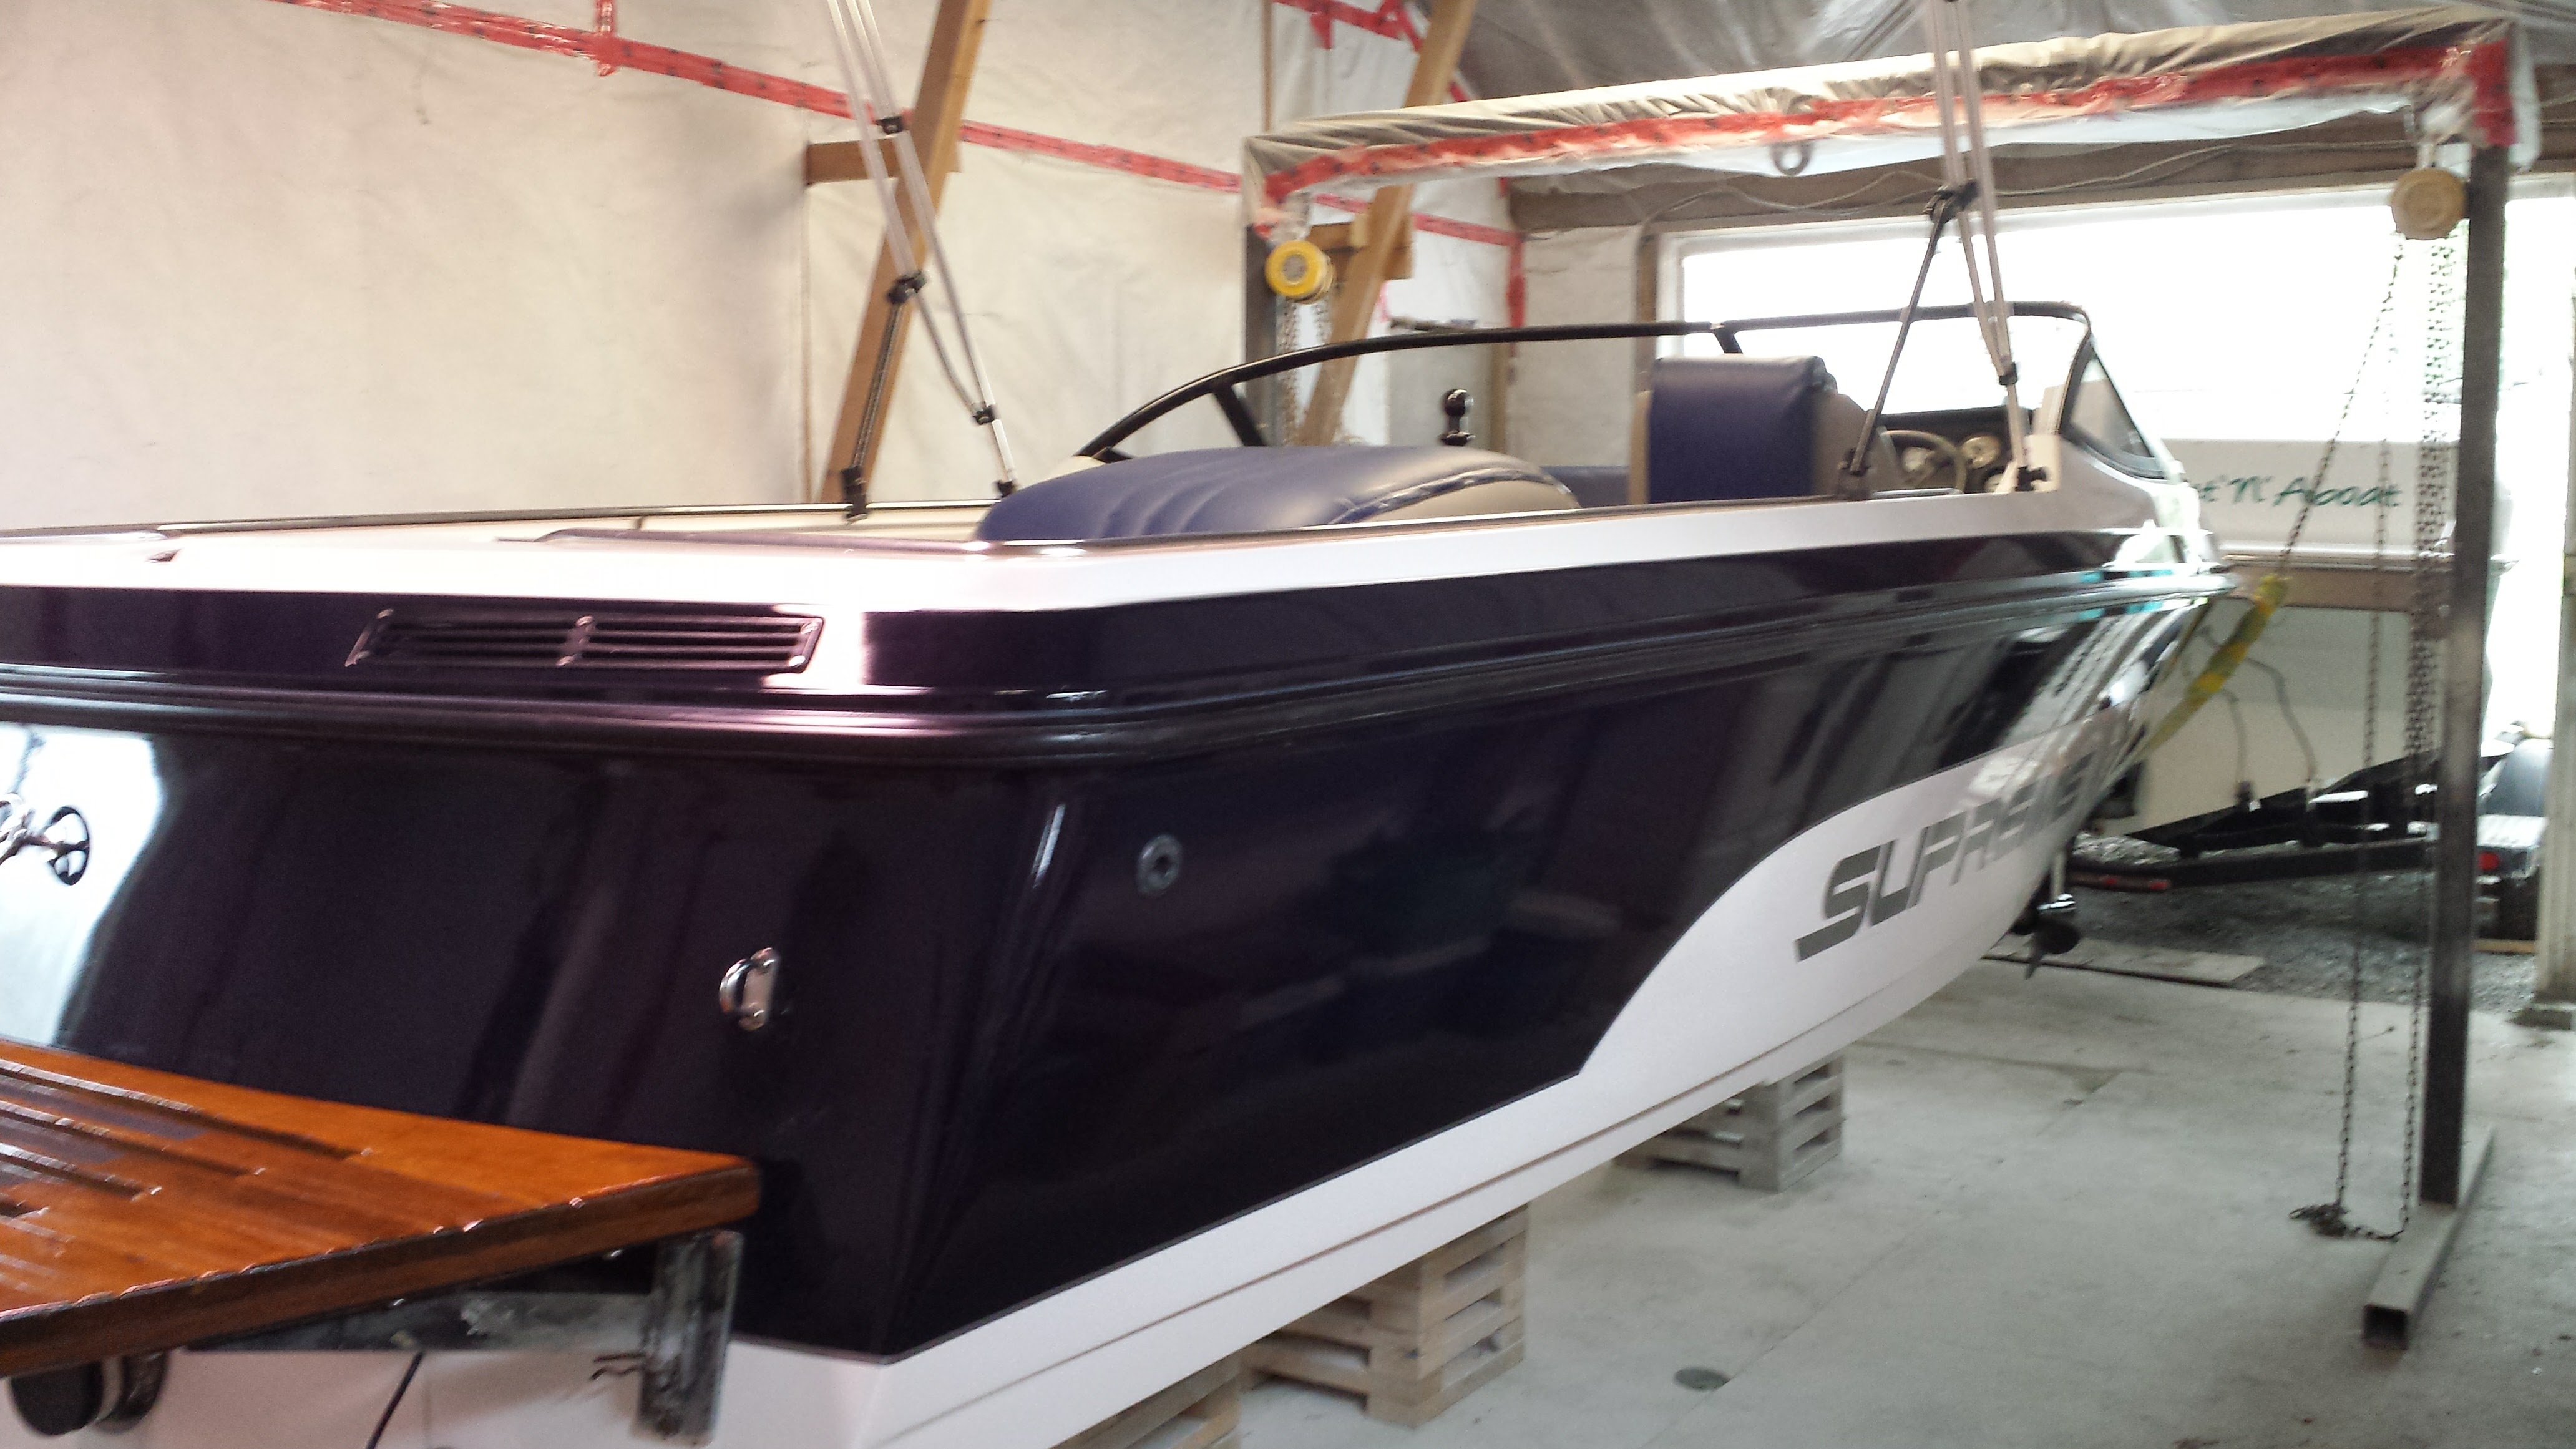 Ski Supreme boat exterior refinishing including a new hull paint job, swim platform varnishing and detailing for a Aldergrove / Langley BC customer from MRV Marine Services.